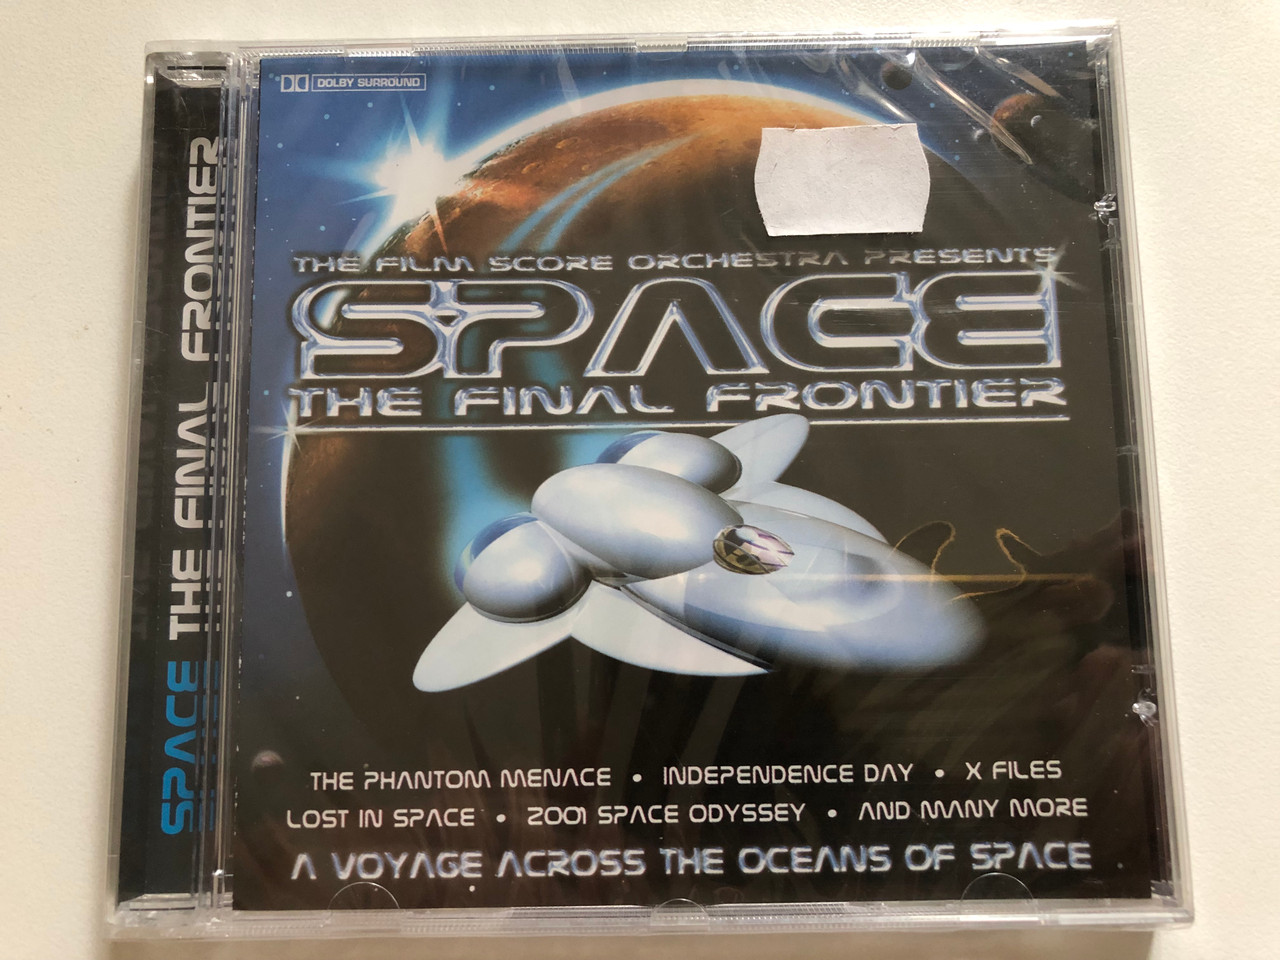 https://cdn10.bigcommerce.com/s-62bdpkt7pb/products/0/images/306568/The_Film_Score_Orchestra_Presents_Space_The_Final_Frontier_-_The_Phantom_Menace_Independence_Day_X_Files_Lost_In_Space_2001_Space_Odyssey_and_many_more_Cedar_Audio_CD_1-1067_1__39483.1698309066.1280.1280.JPG?c=2